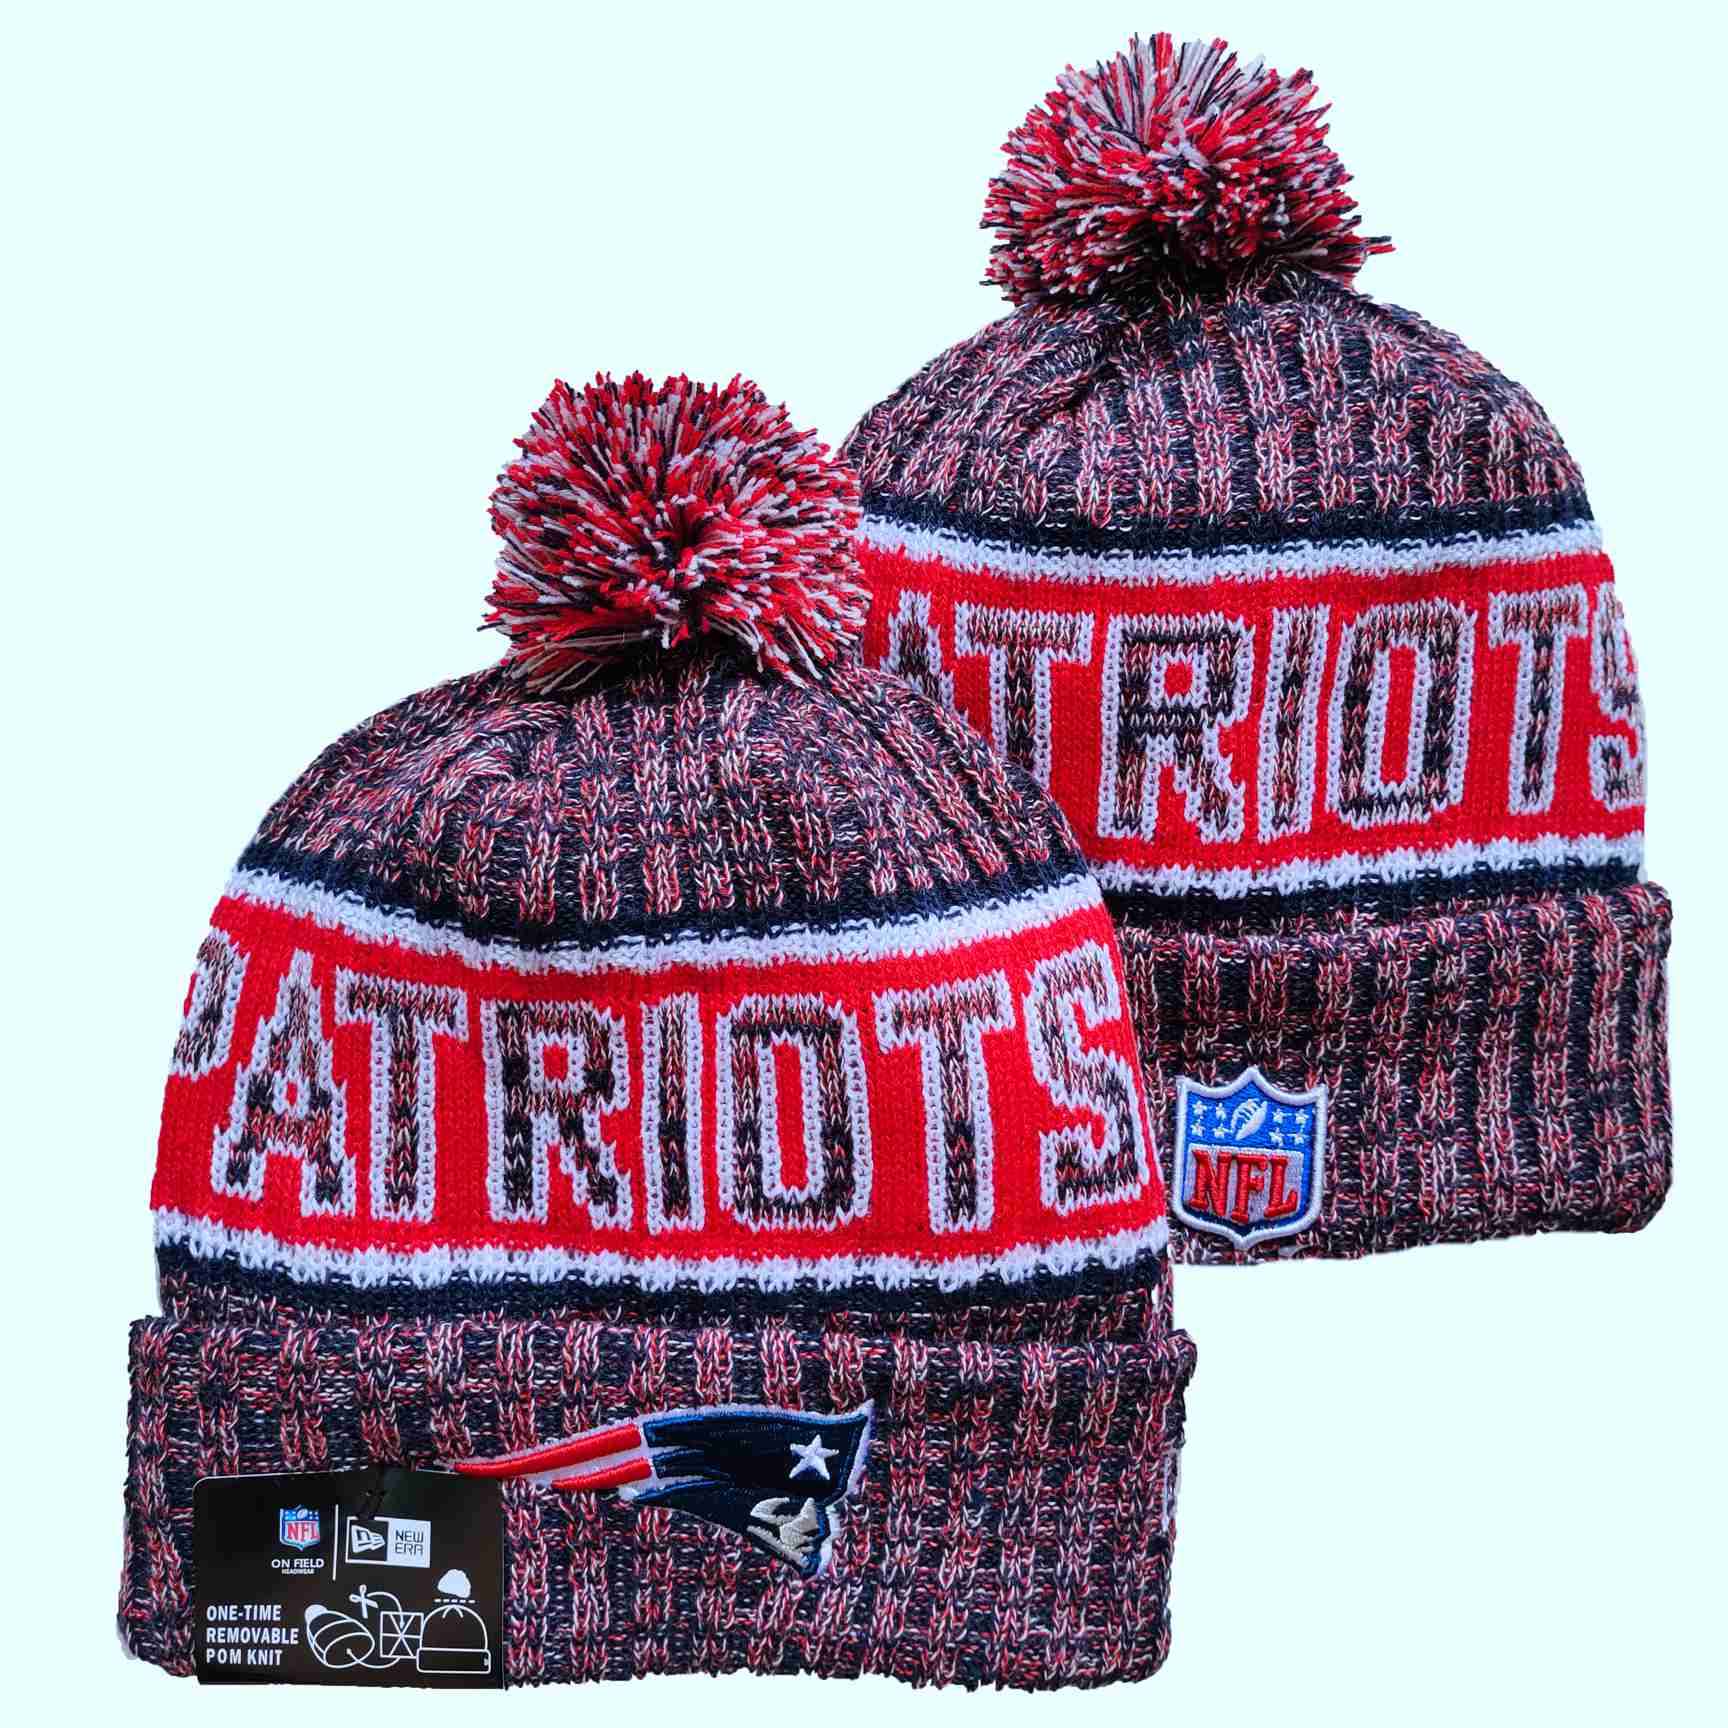 NFL New England Patriots Beanies Knit Hats-YD1258